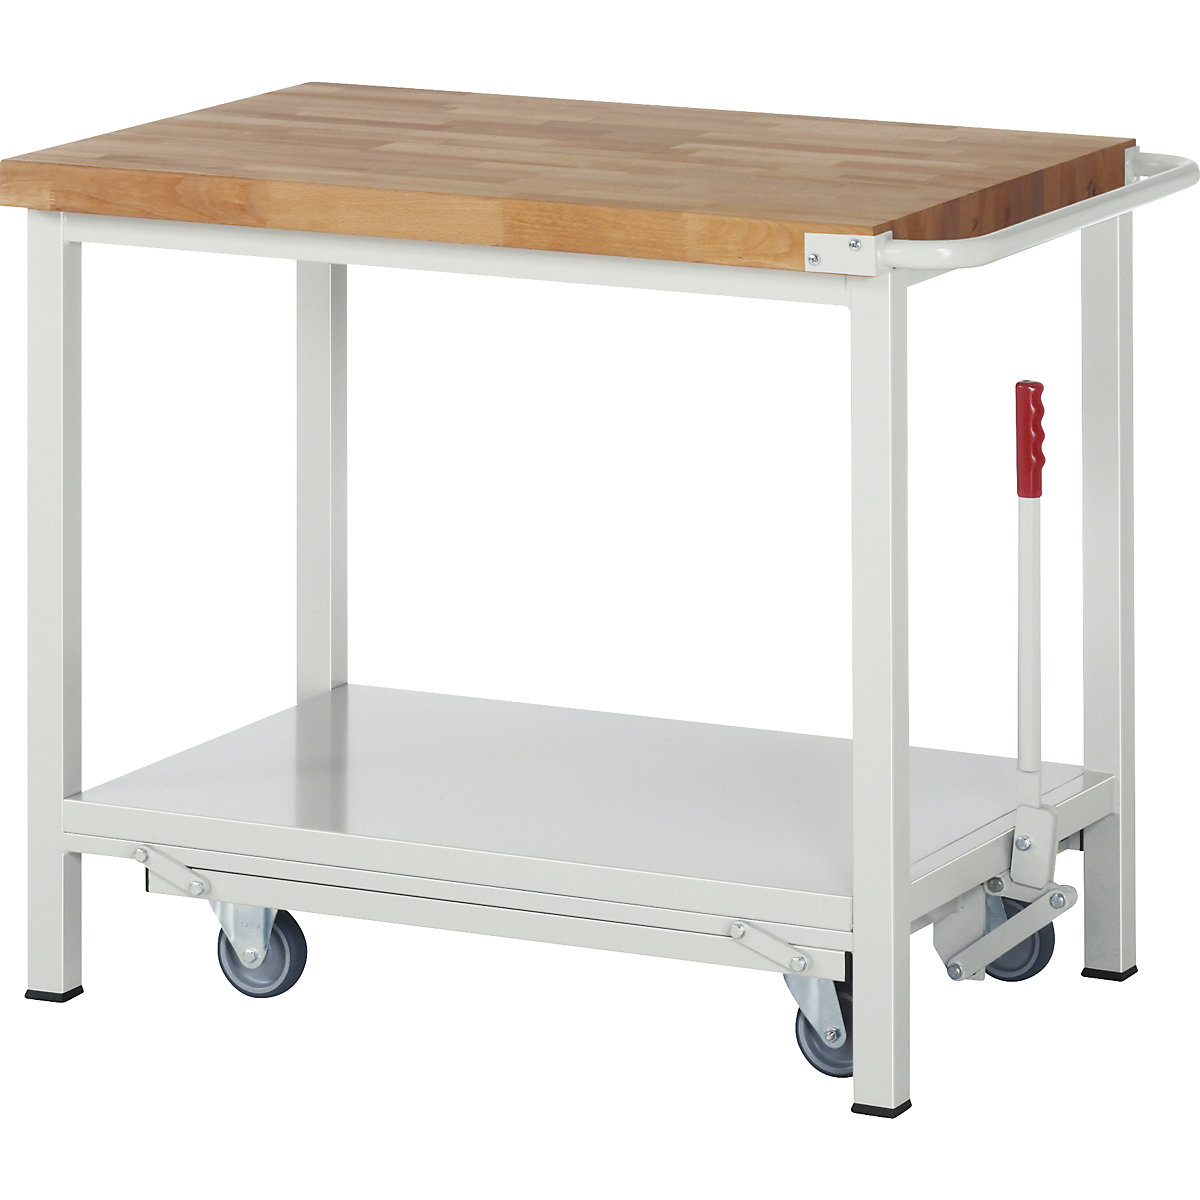 Mobile and lowerable workbench, Series 8 frame construction – eurokraft pro, 1 shelf, WxD 1000 x 700 mm-3